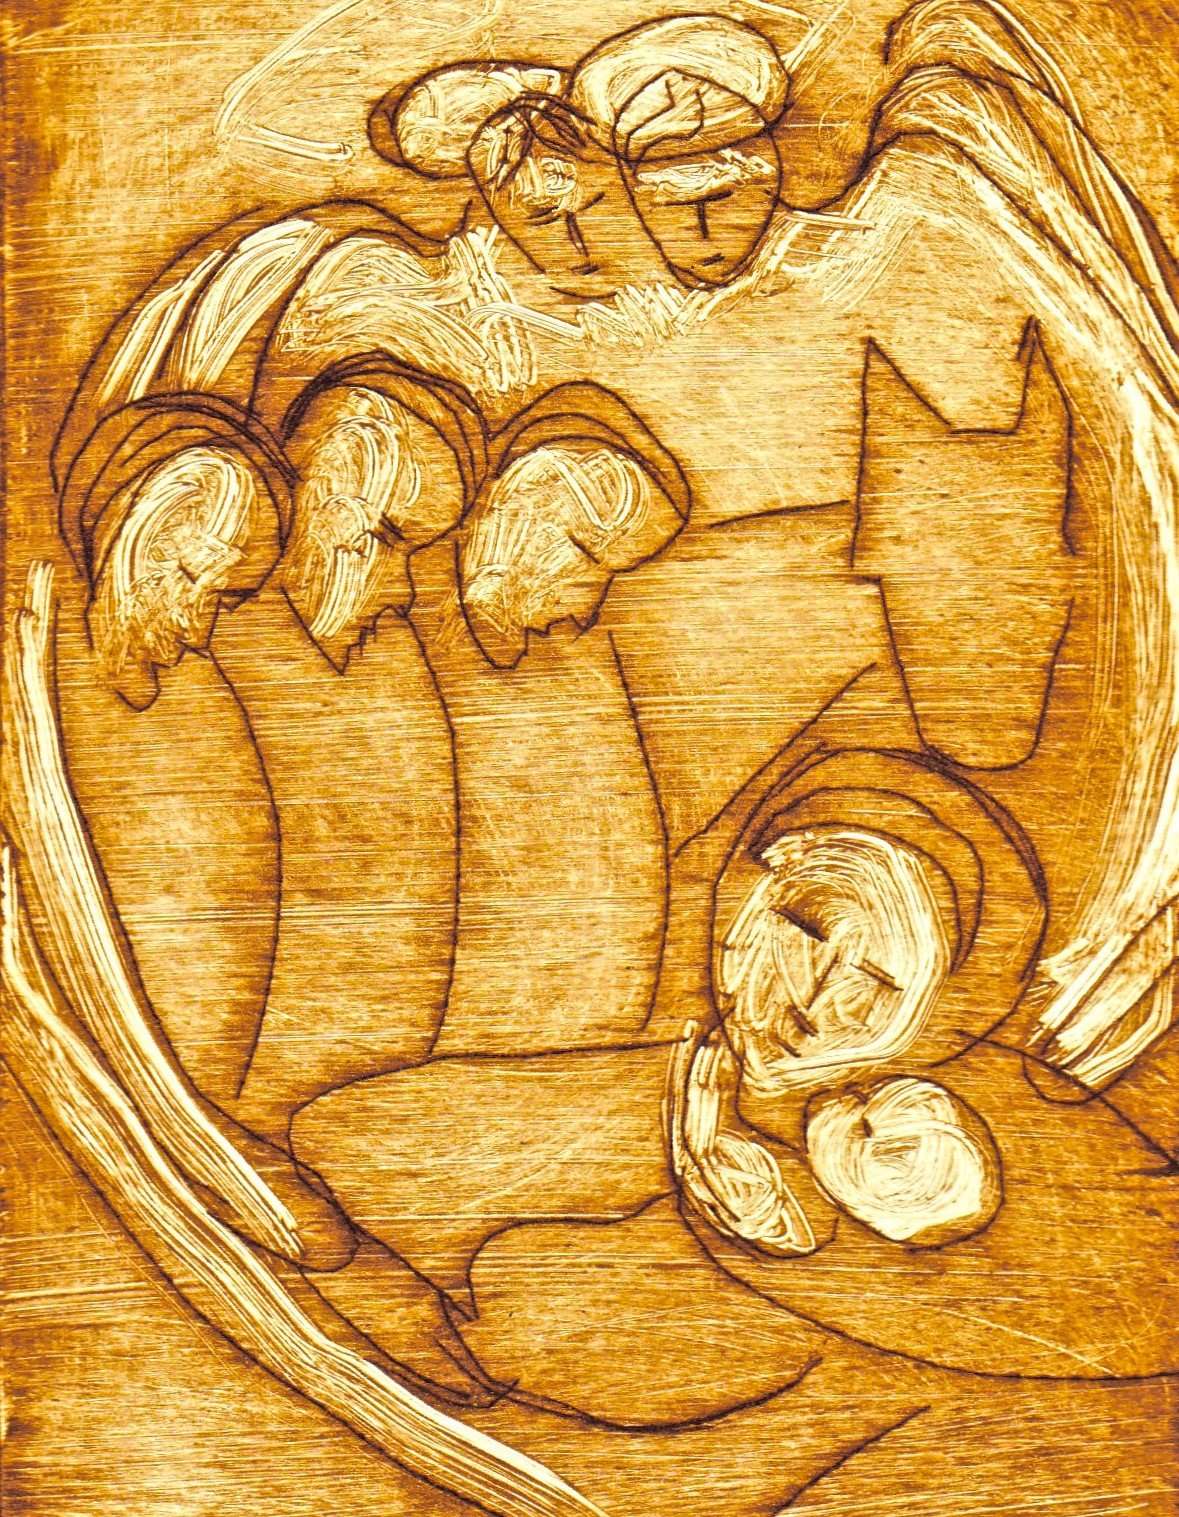 "Nativity" by Susana Youngsteadt